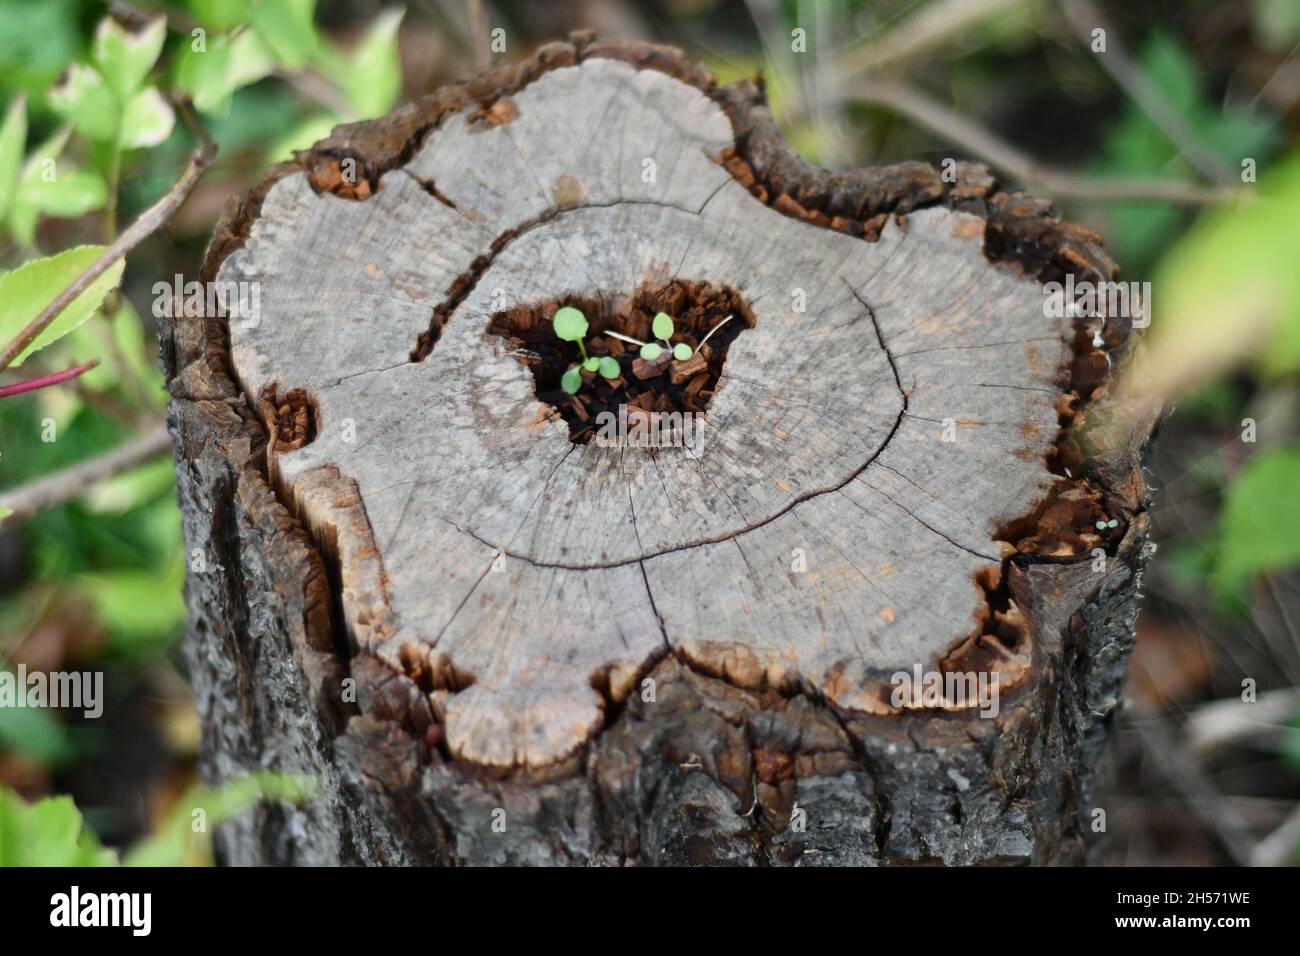 A tree stump decaying with a void in the middle where new life is growing Stock Photo